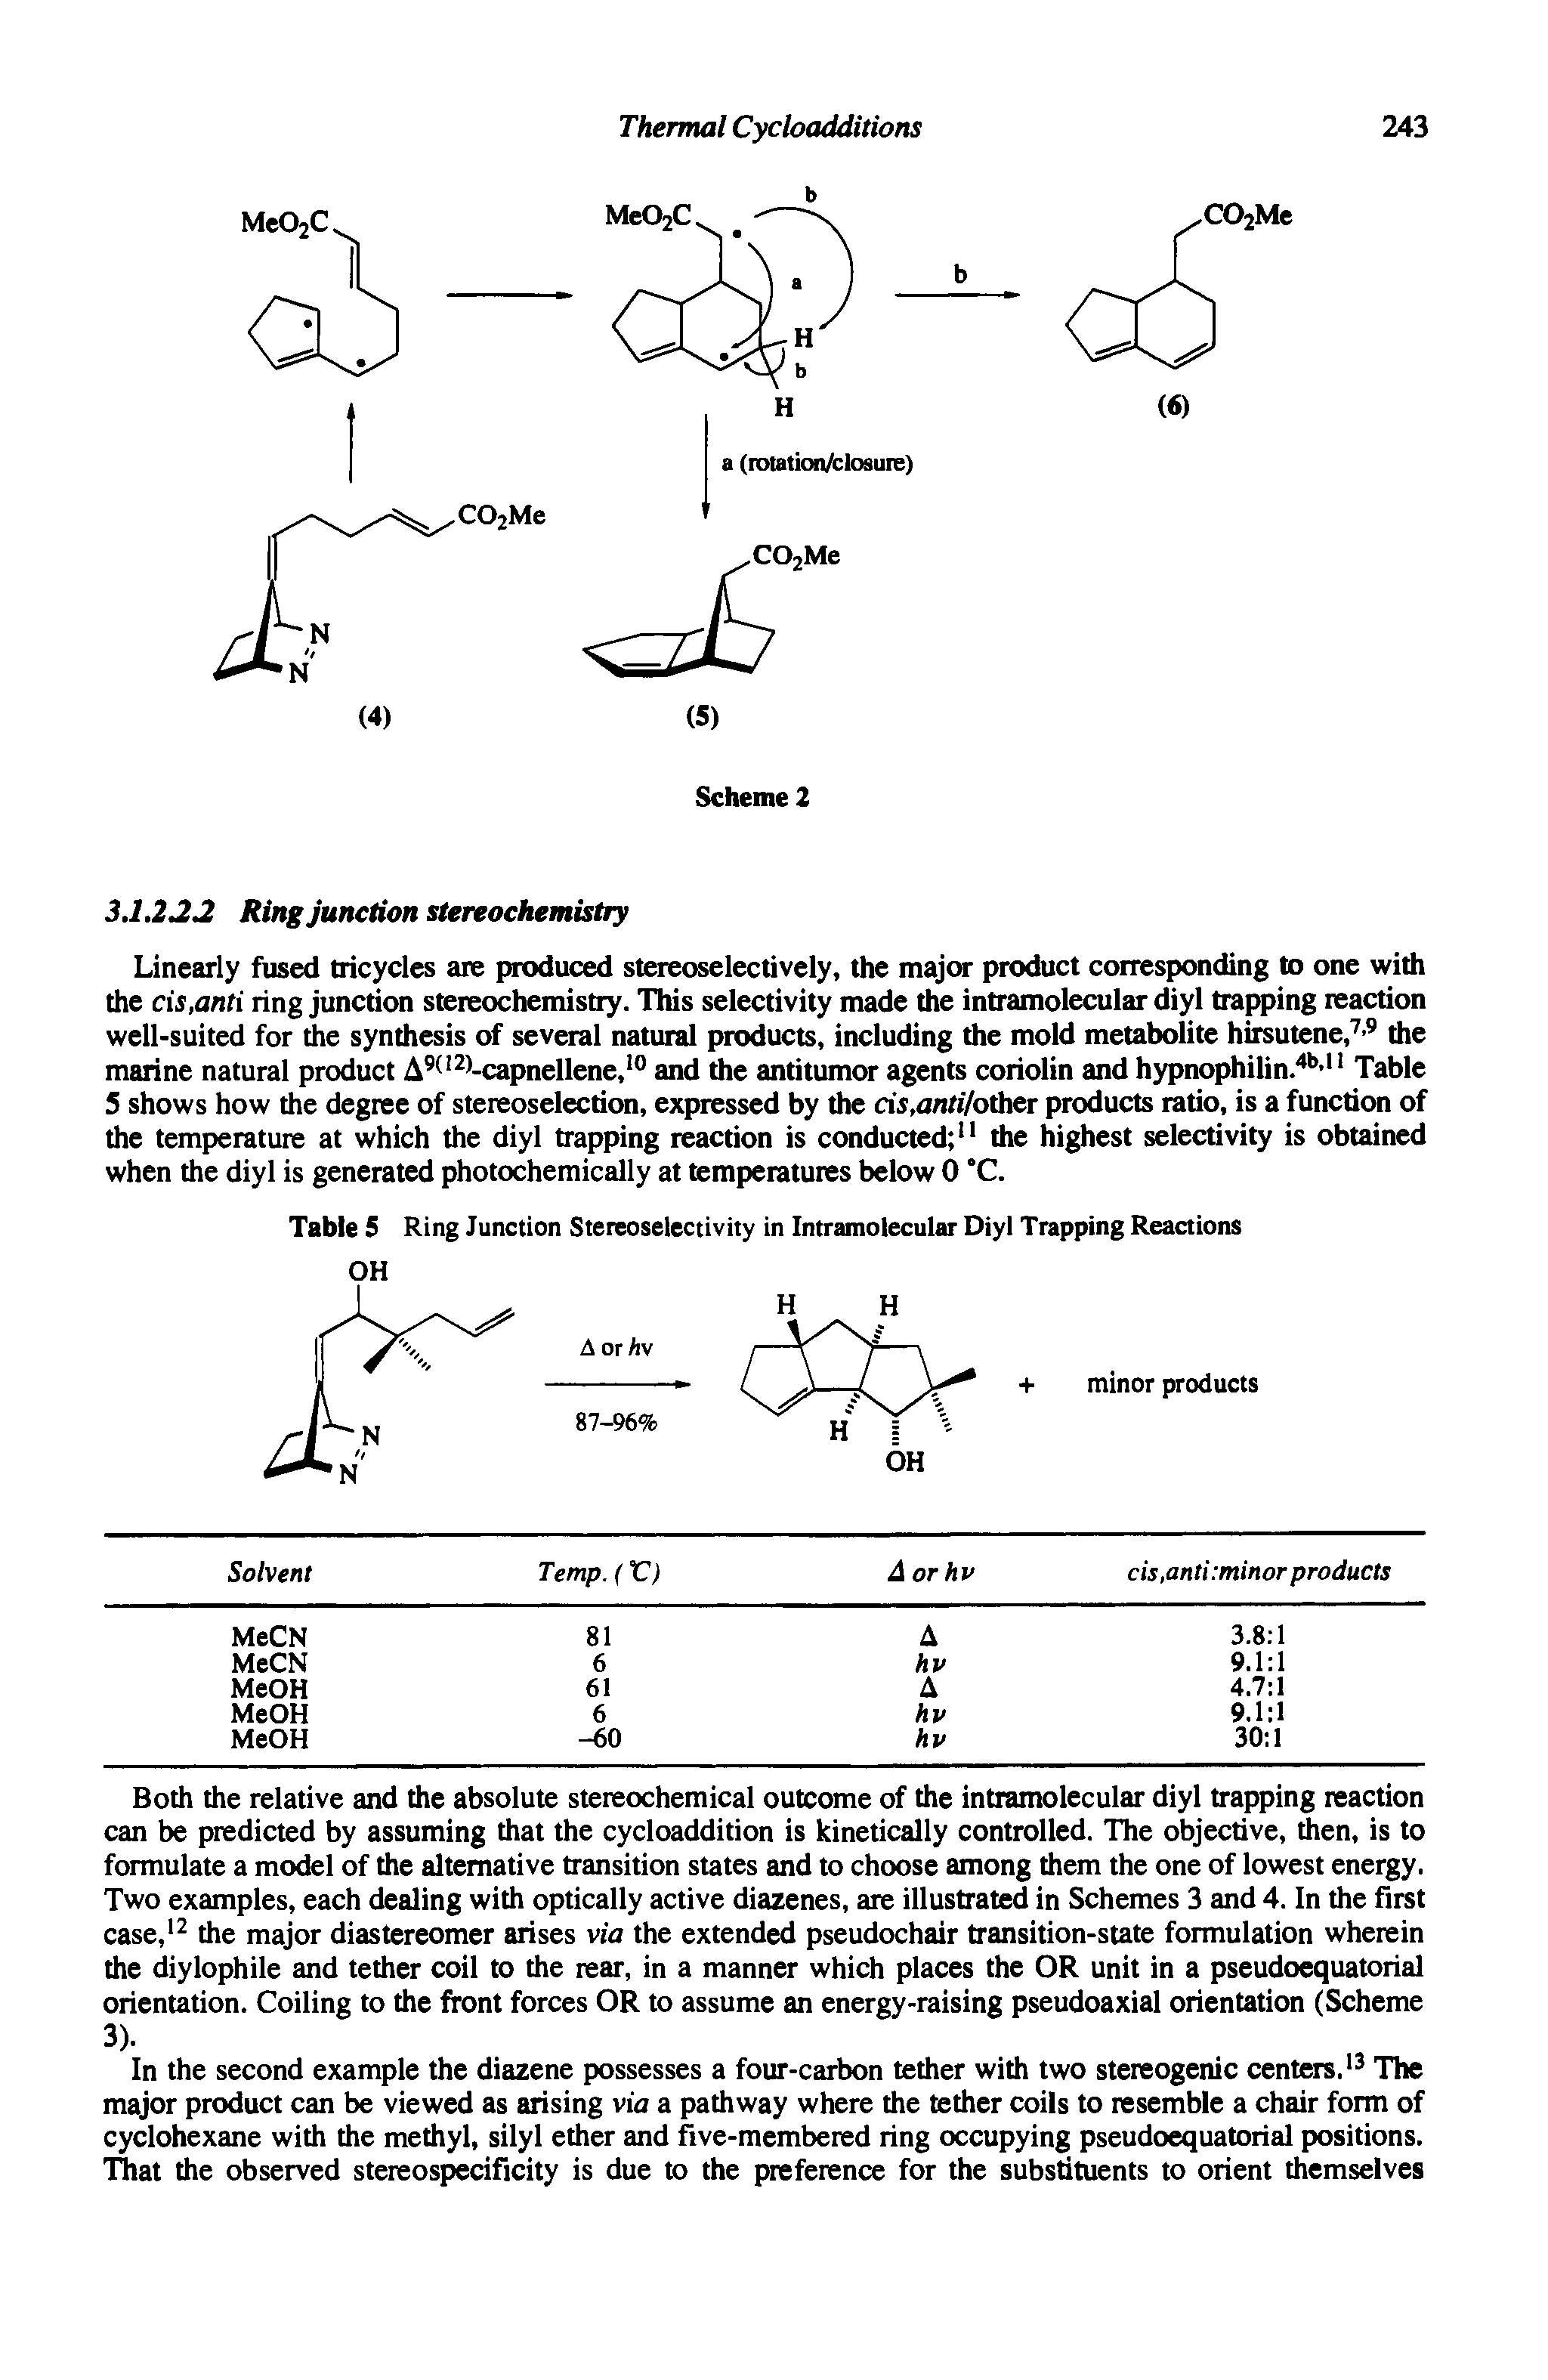 Table 5 Ring Junction Stereoselectivity in Intramolecular Diyl Trapping Reactions OH...